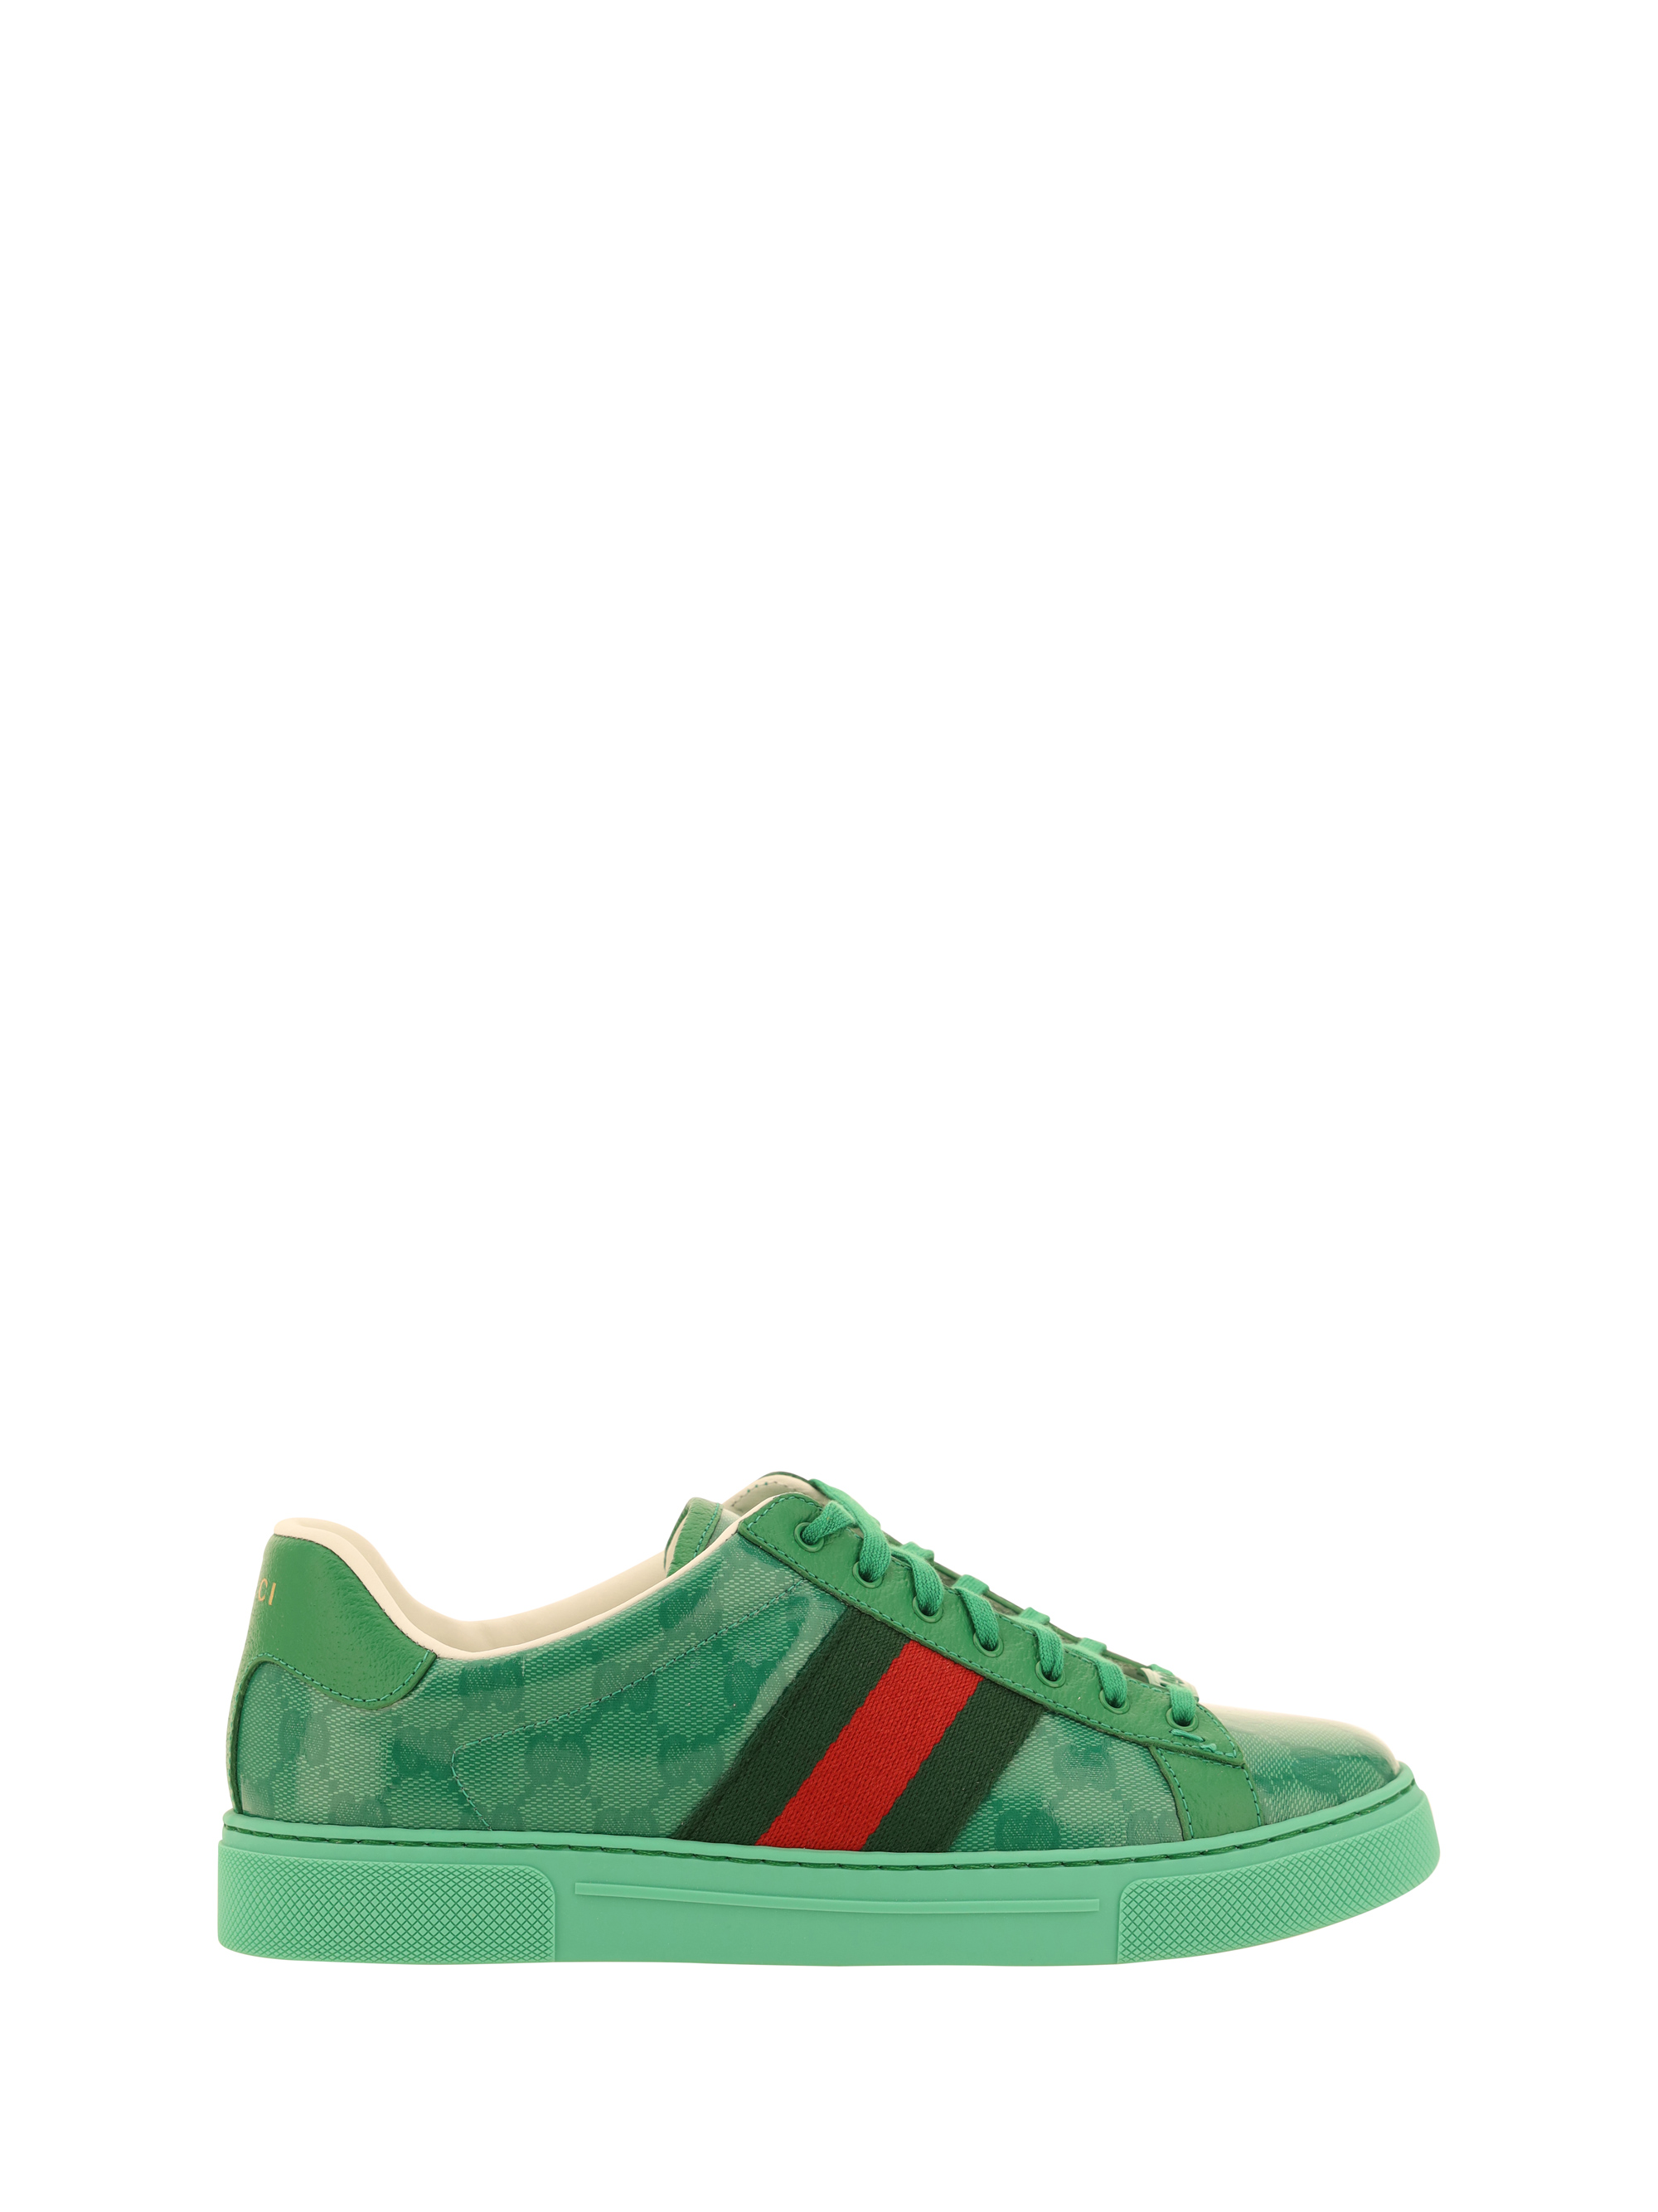 Gucci - Men - Suede-Trimmed Monogrammed Canvas High-Top Sneakers Neutrals - UK 11